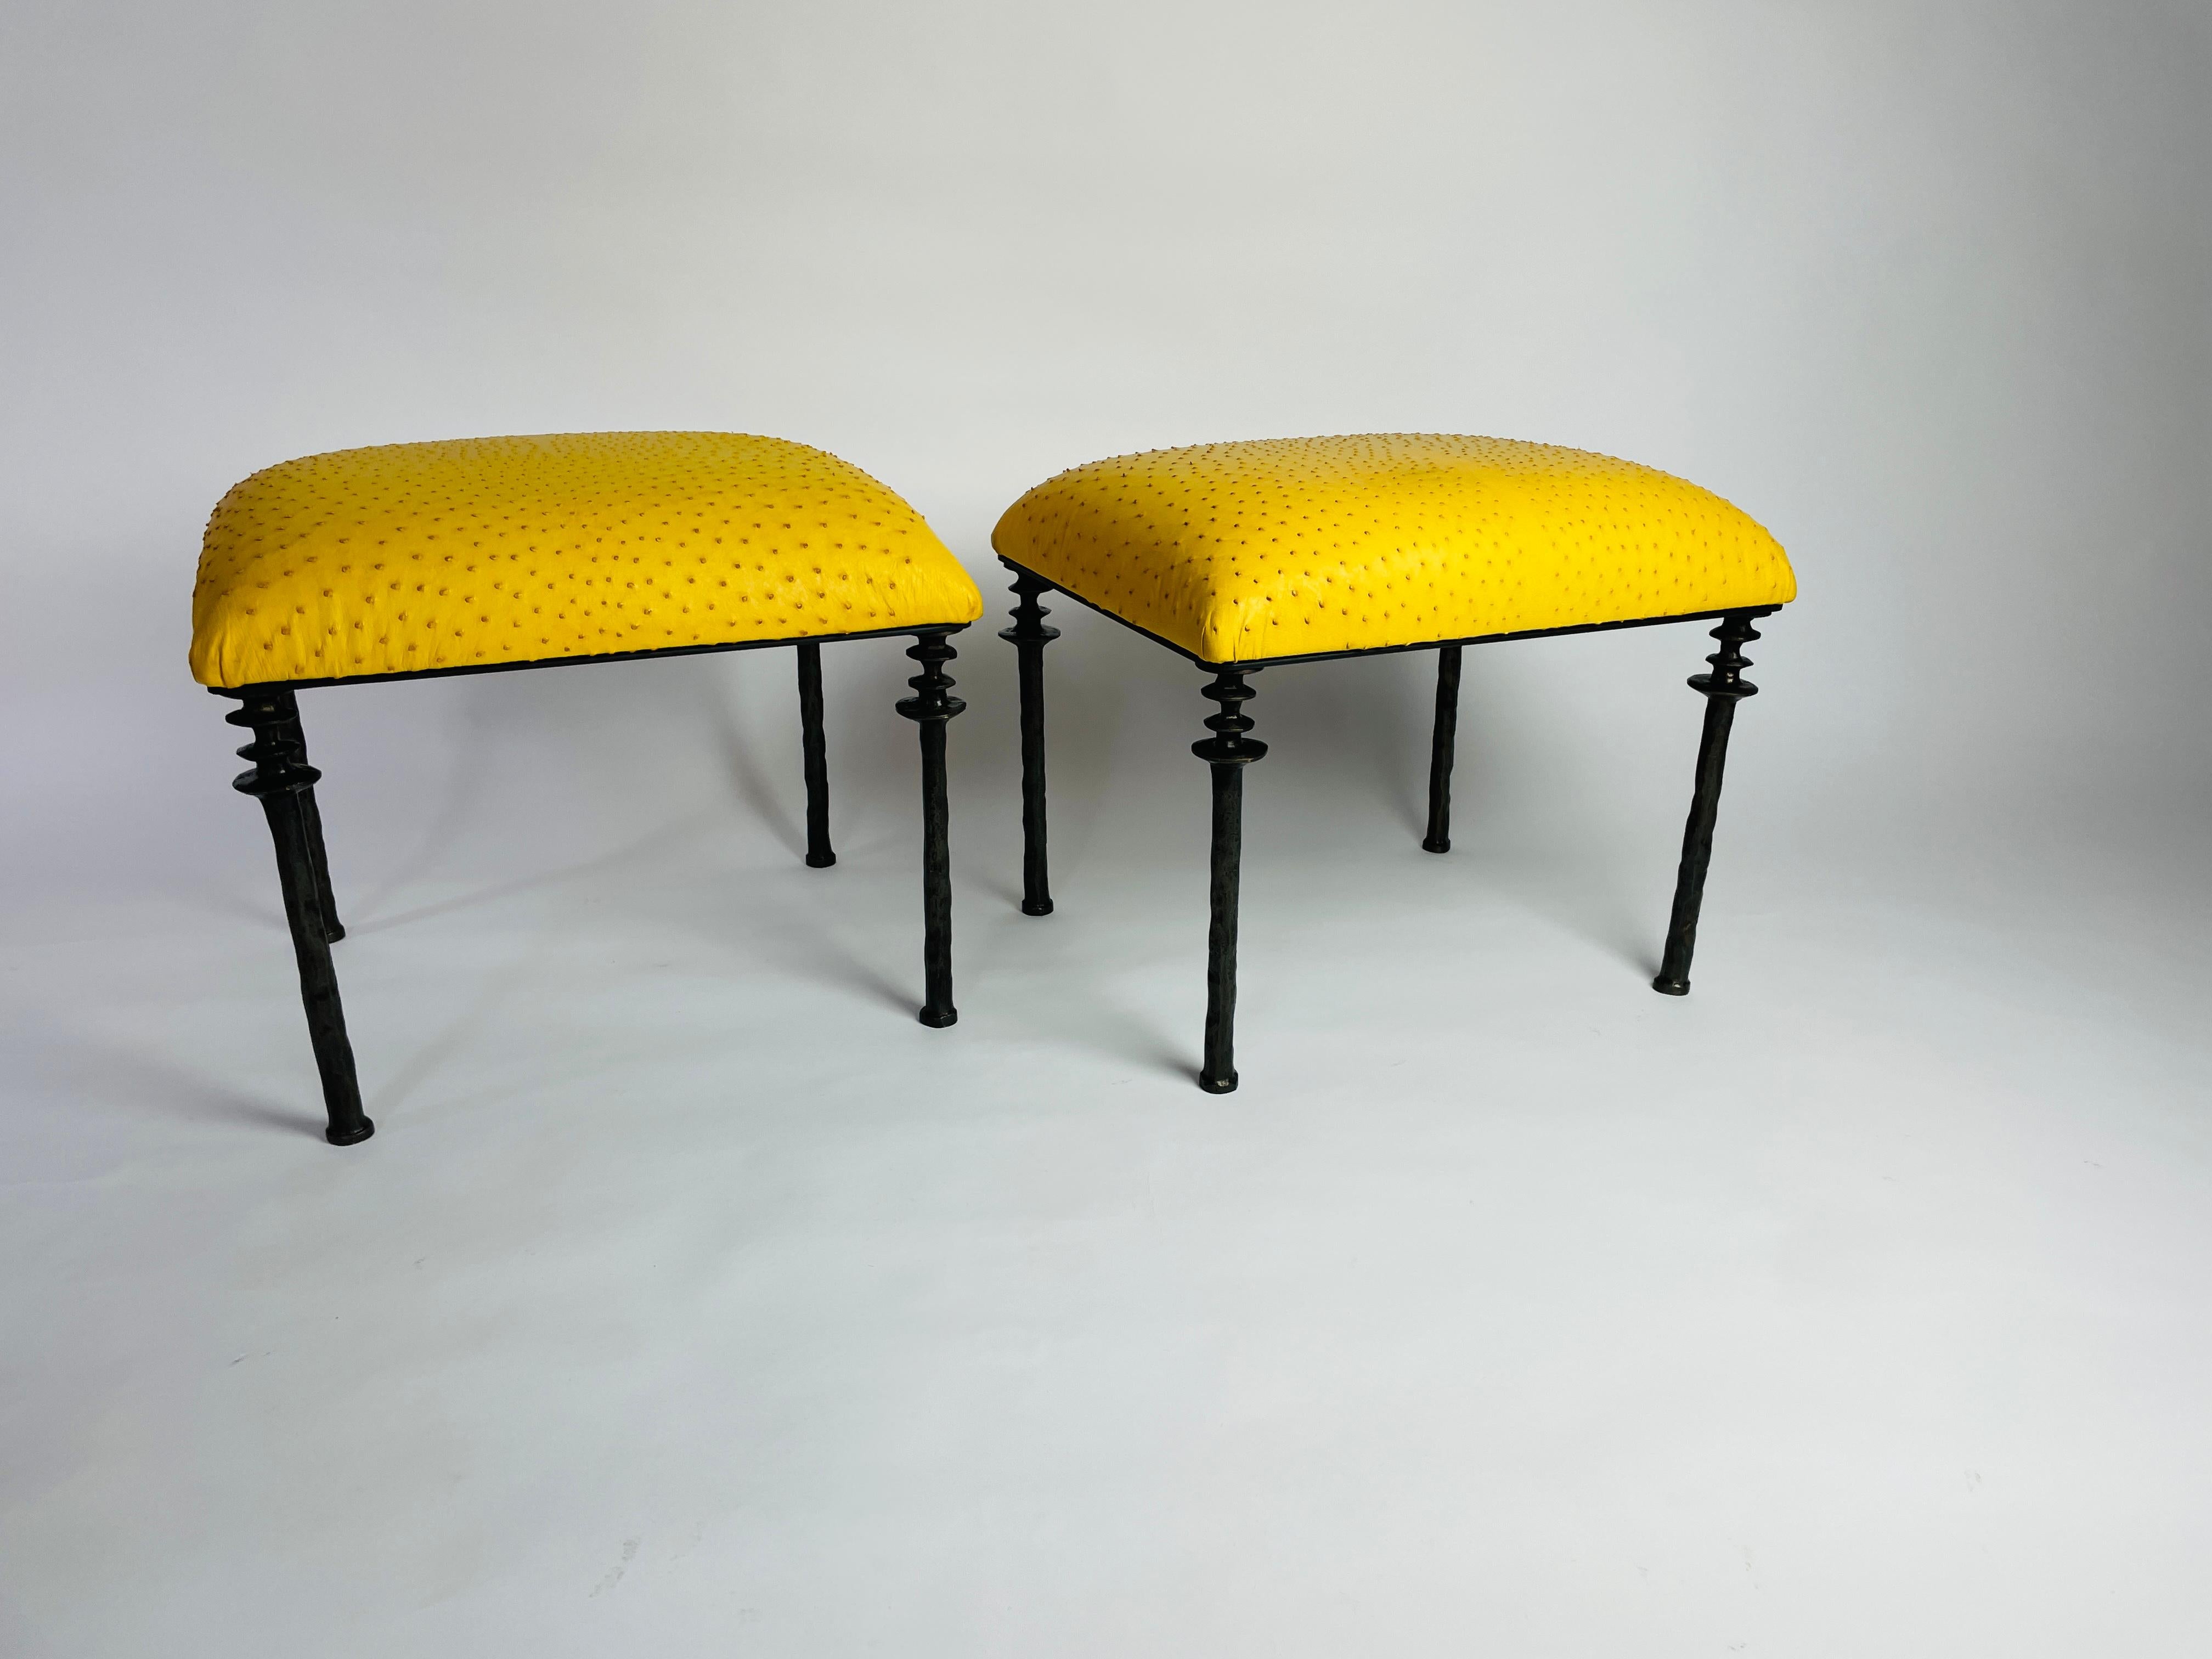 Two beautiful stools inspired by Diego Giacometti, these stools are ideal for those who are looking for unique seating. Their cast bronze legs provide a truly organic touch. The seat cushion has been upholstered in a striking citron yellow farmed